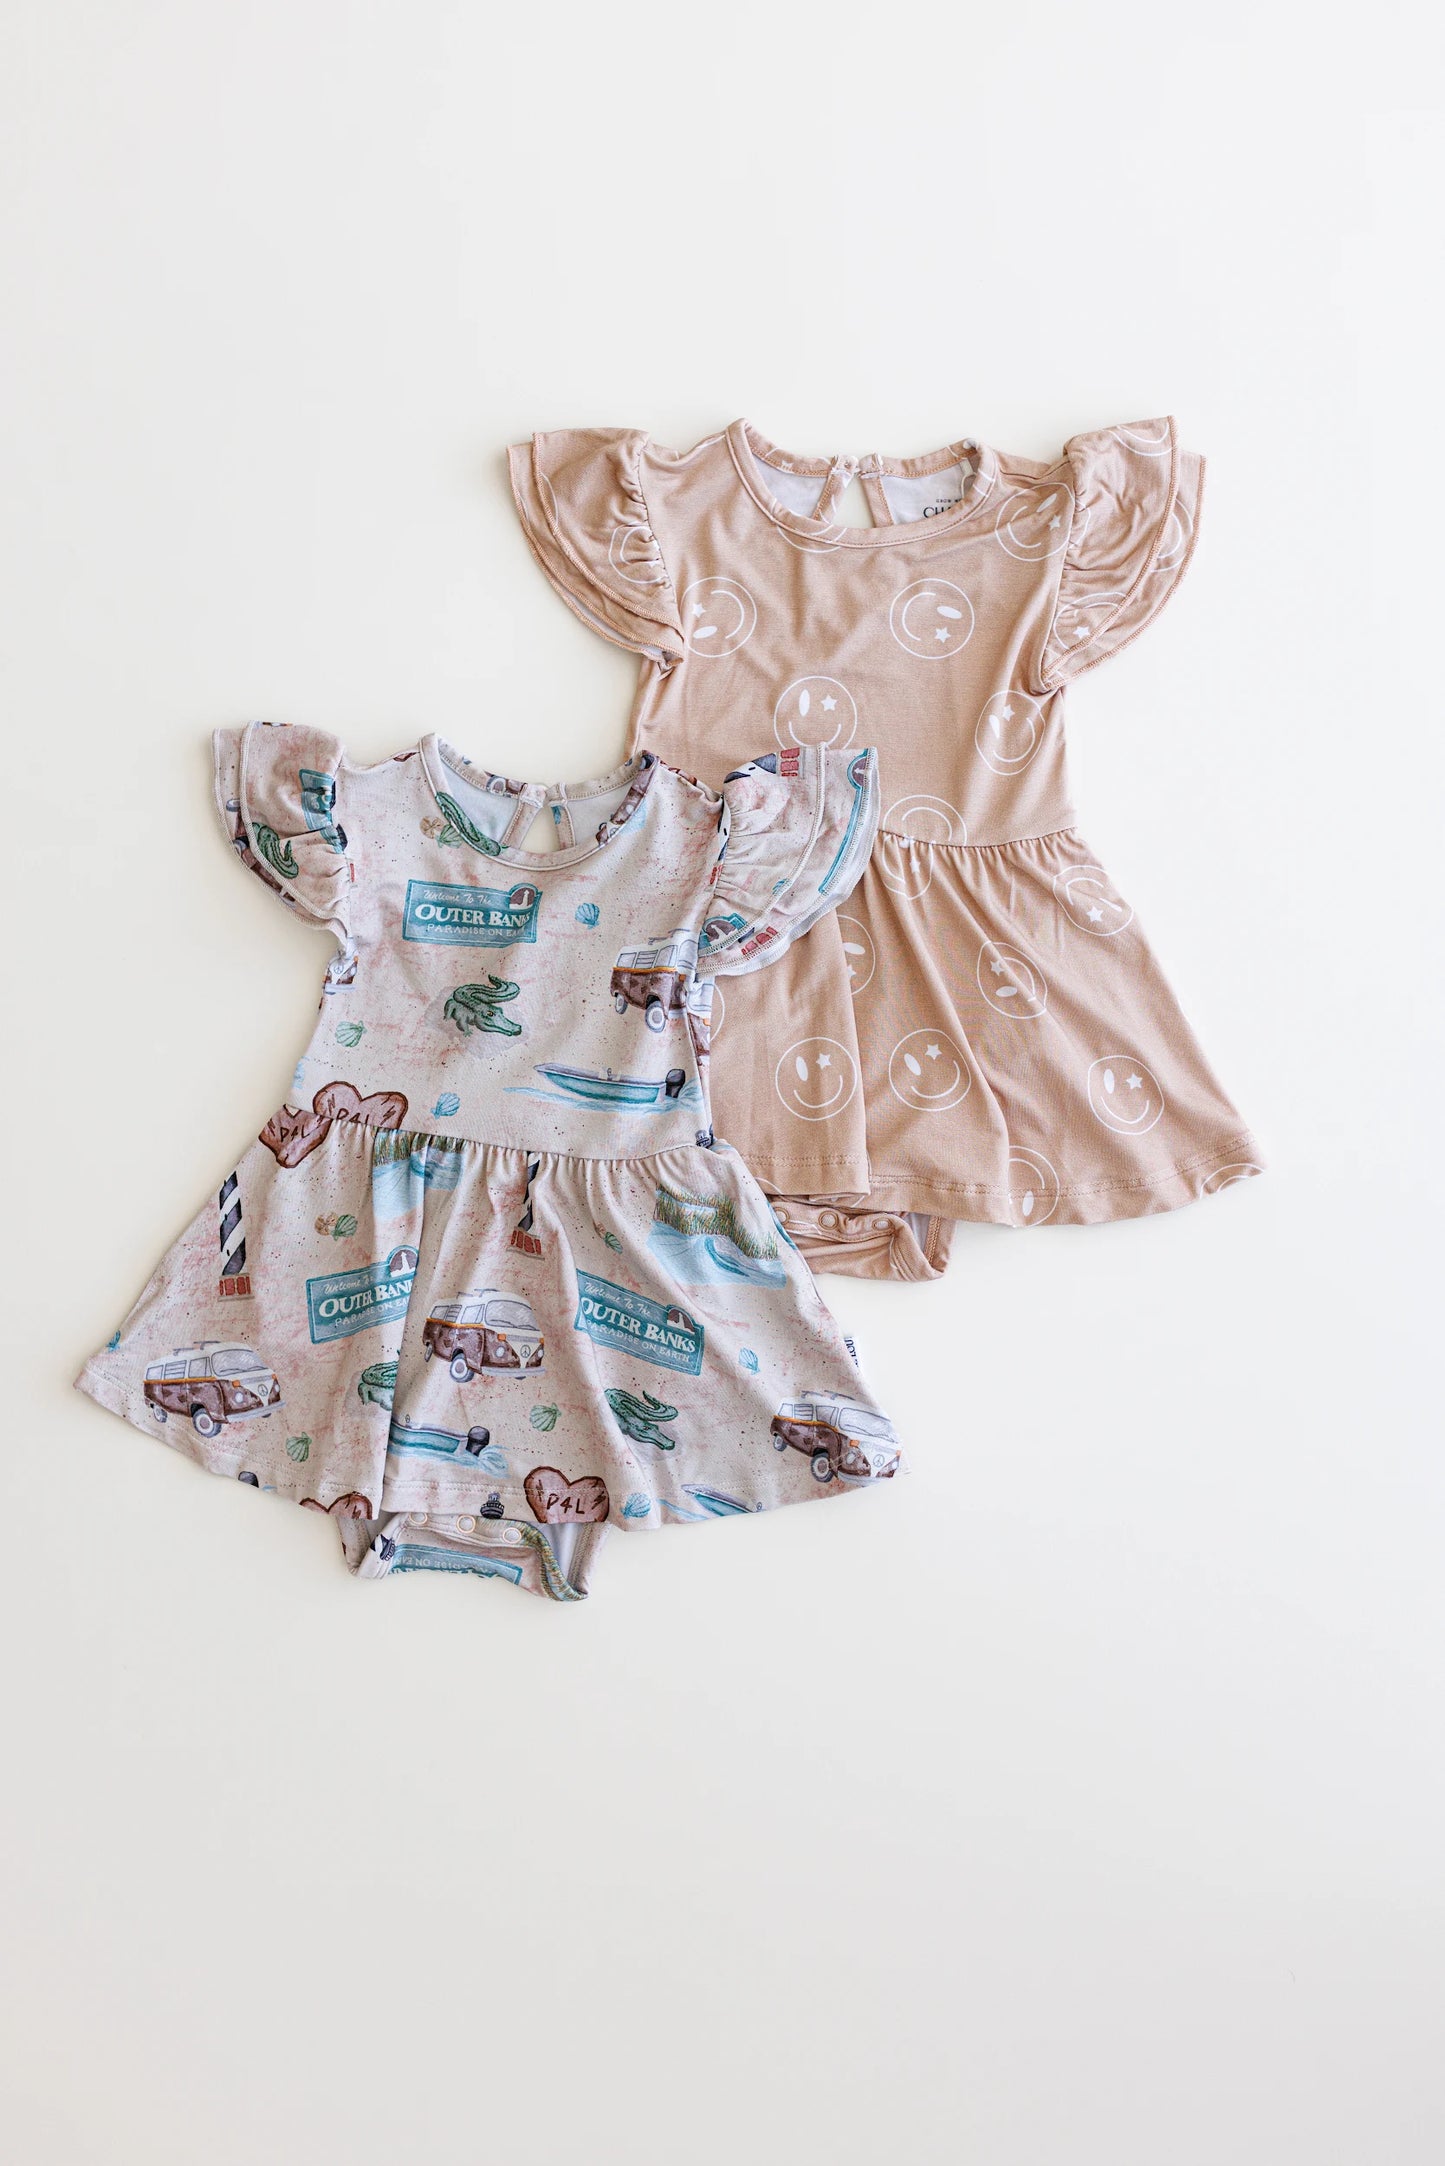 Gender neutral bamboo twirl dress for baby girls or toddler girls in Outer Banks OBX print with bodysuit.